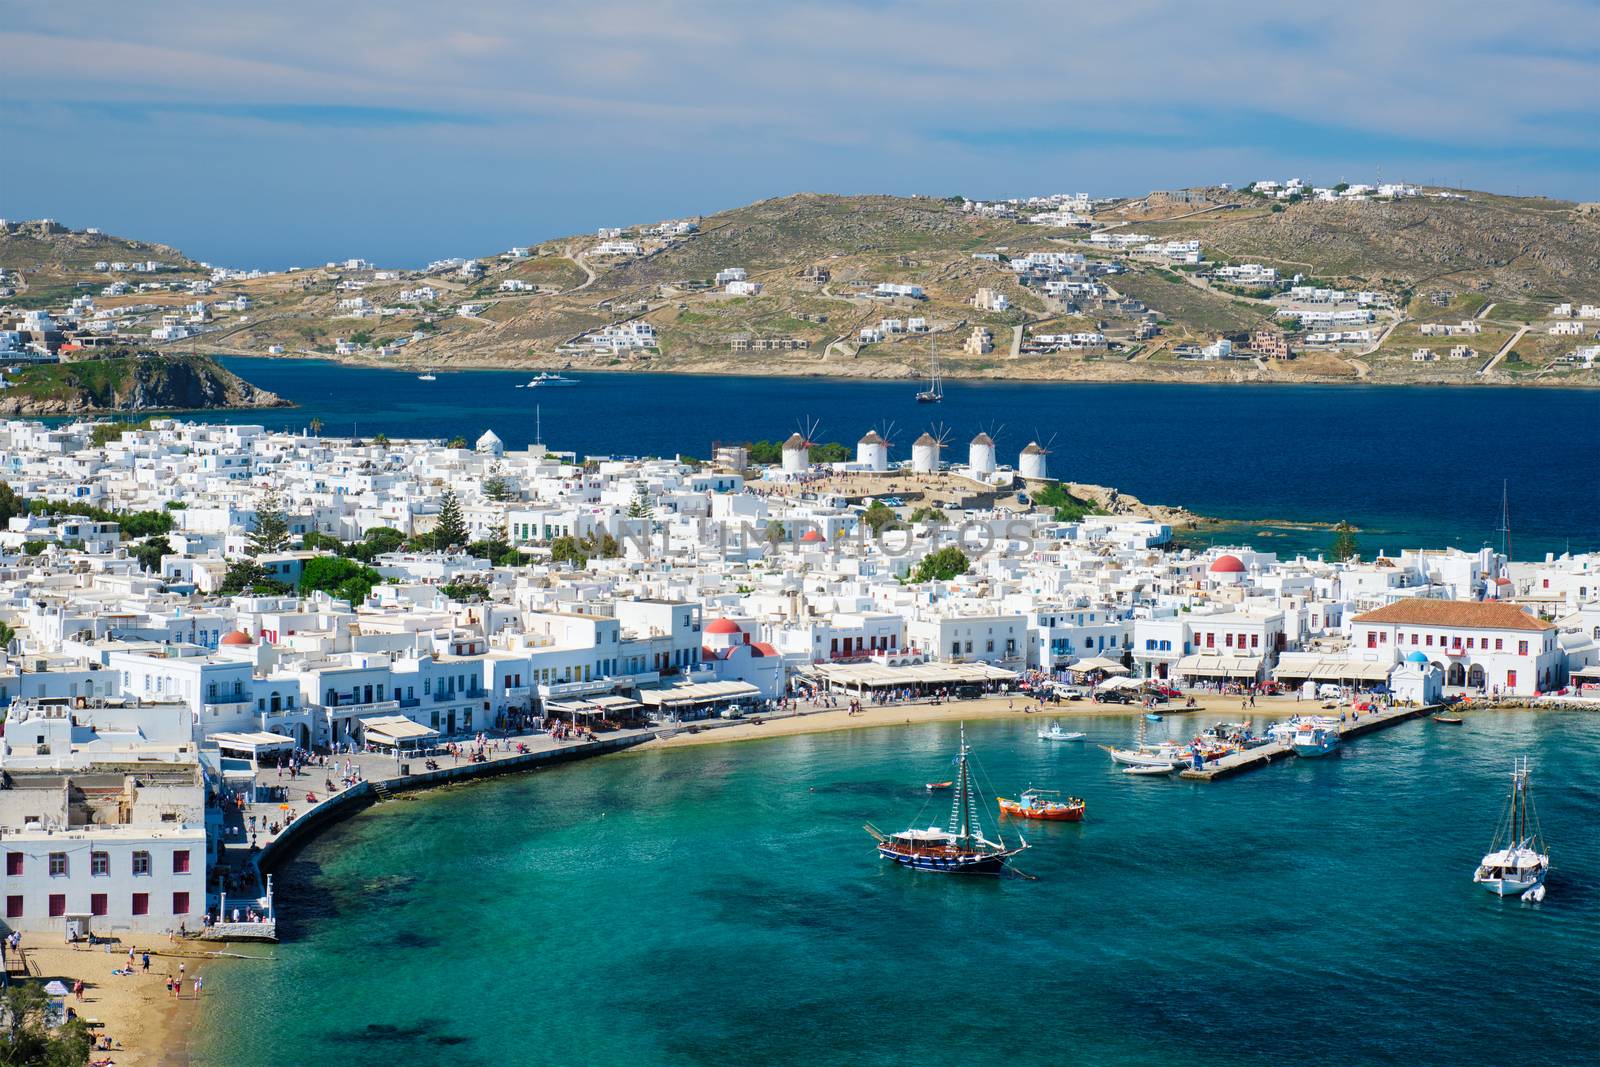 View of Mykonos town Greek tourist holiday vacation destination with famous windmills, and port with boats and yachts. Mykonos, Cyclades islands, Greece